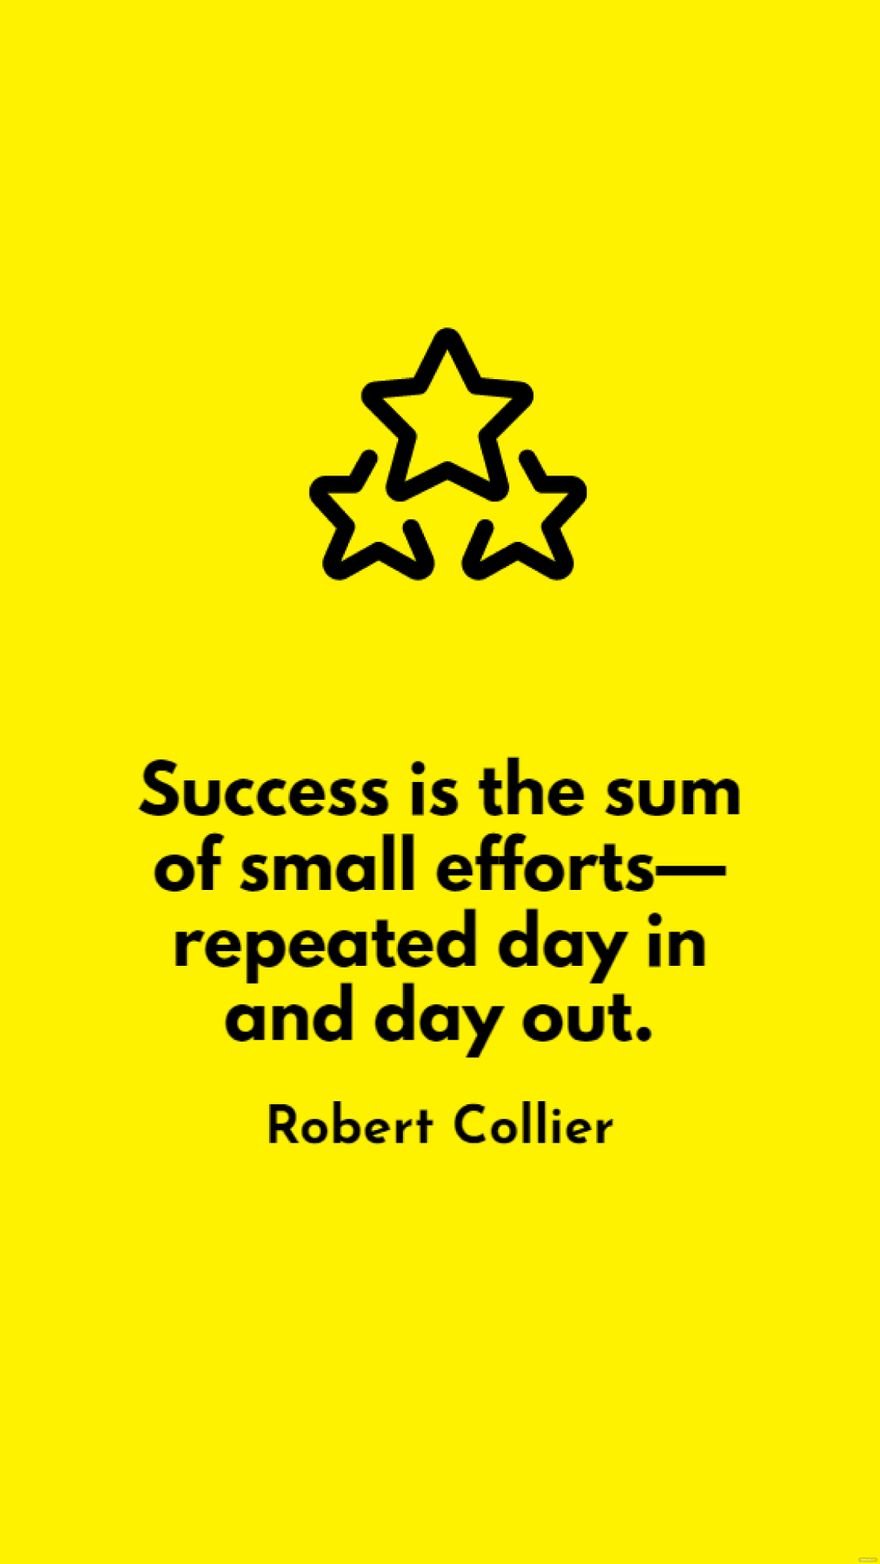 Robert Collier - Success is the sum of small efforts - repeated day in and day out.